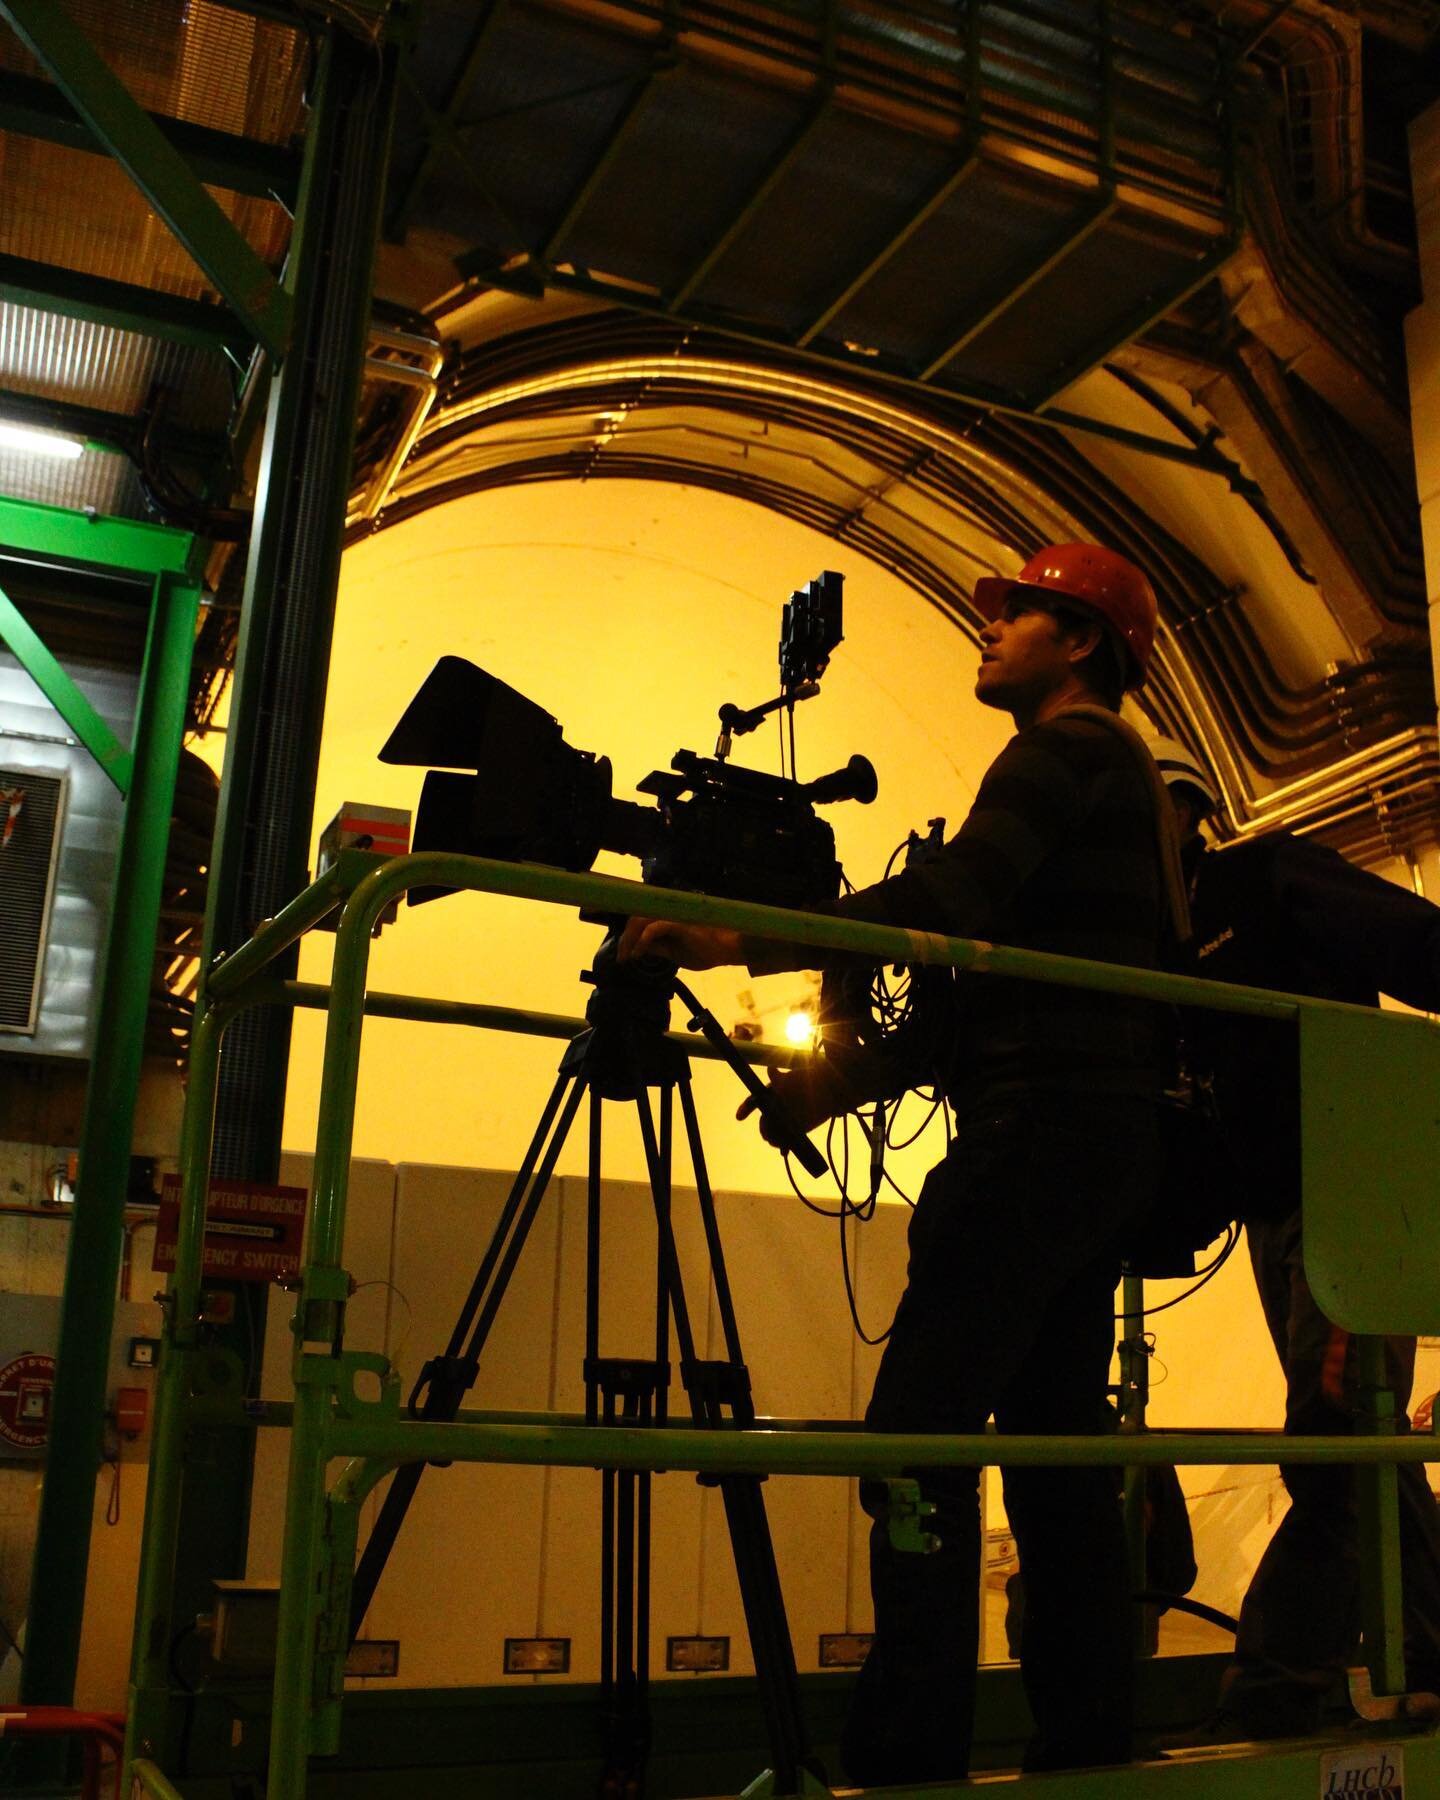 Director Steve Elkins filming at the LHCb detector of CERN&rsquo;s Large Hadron Collider (Ferney-Voltaire, France).